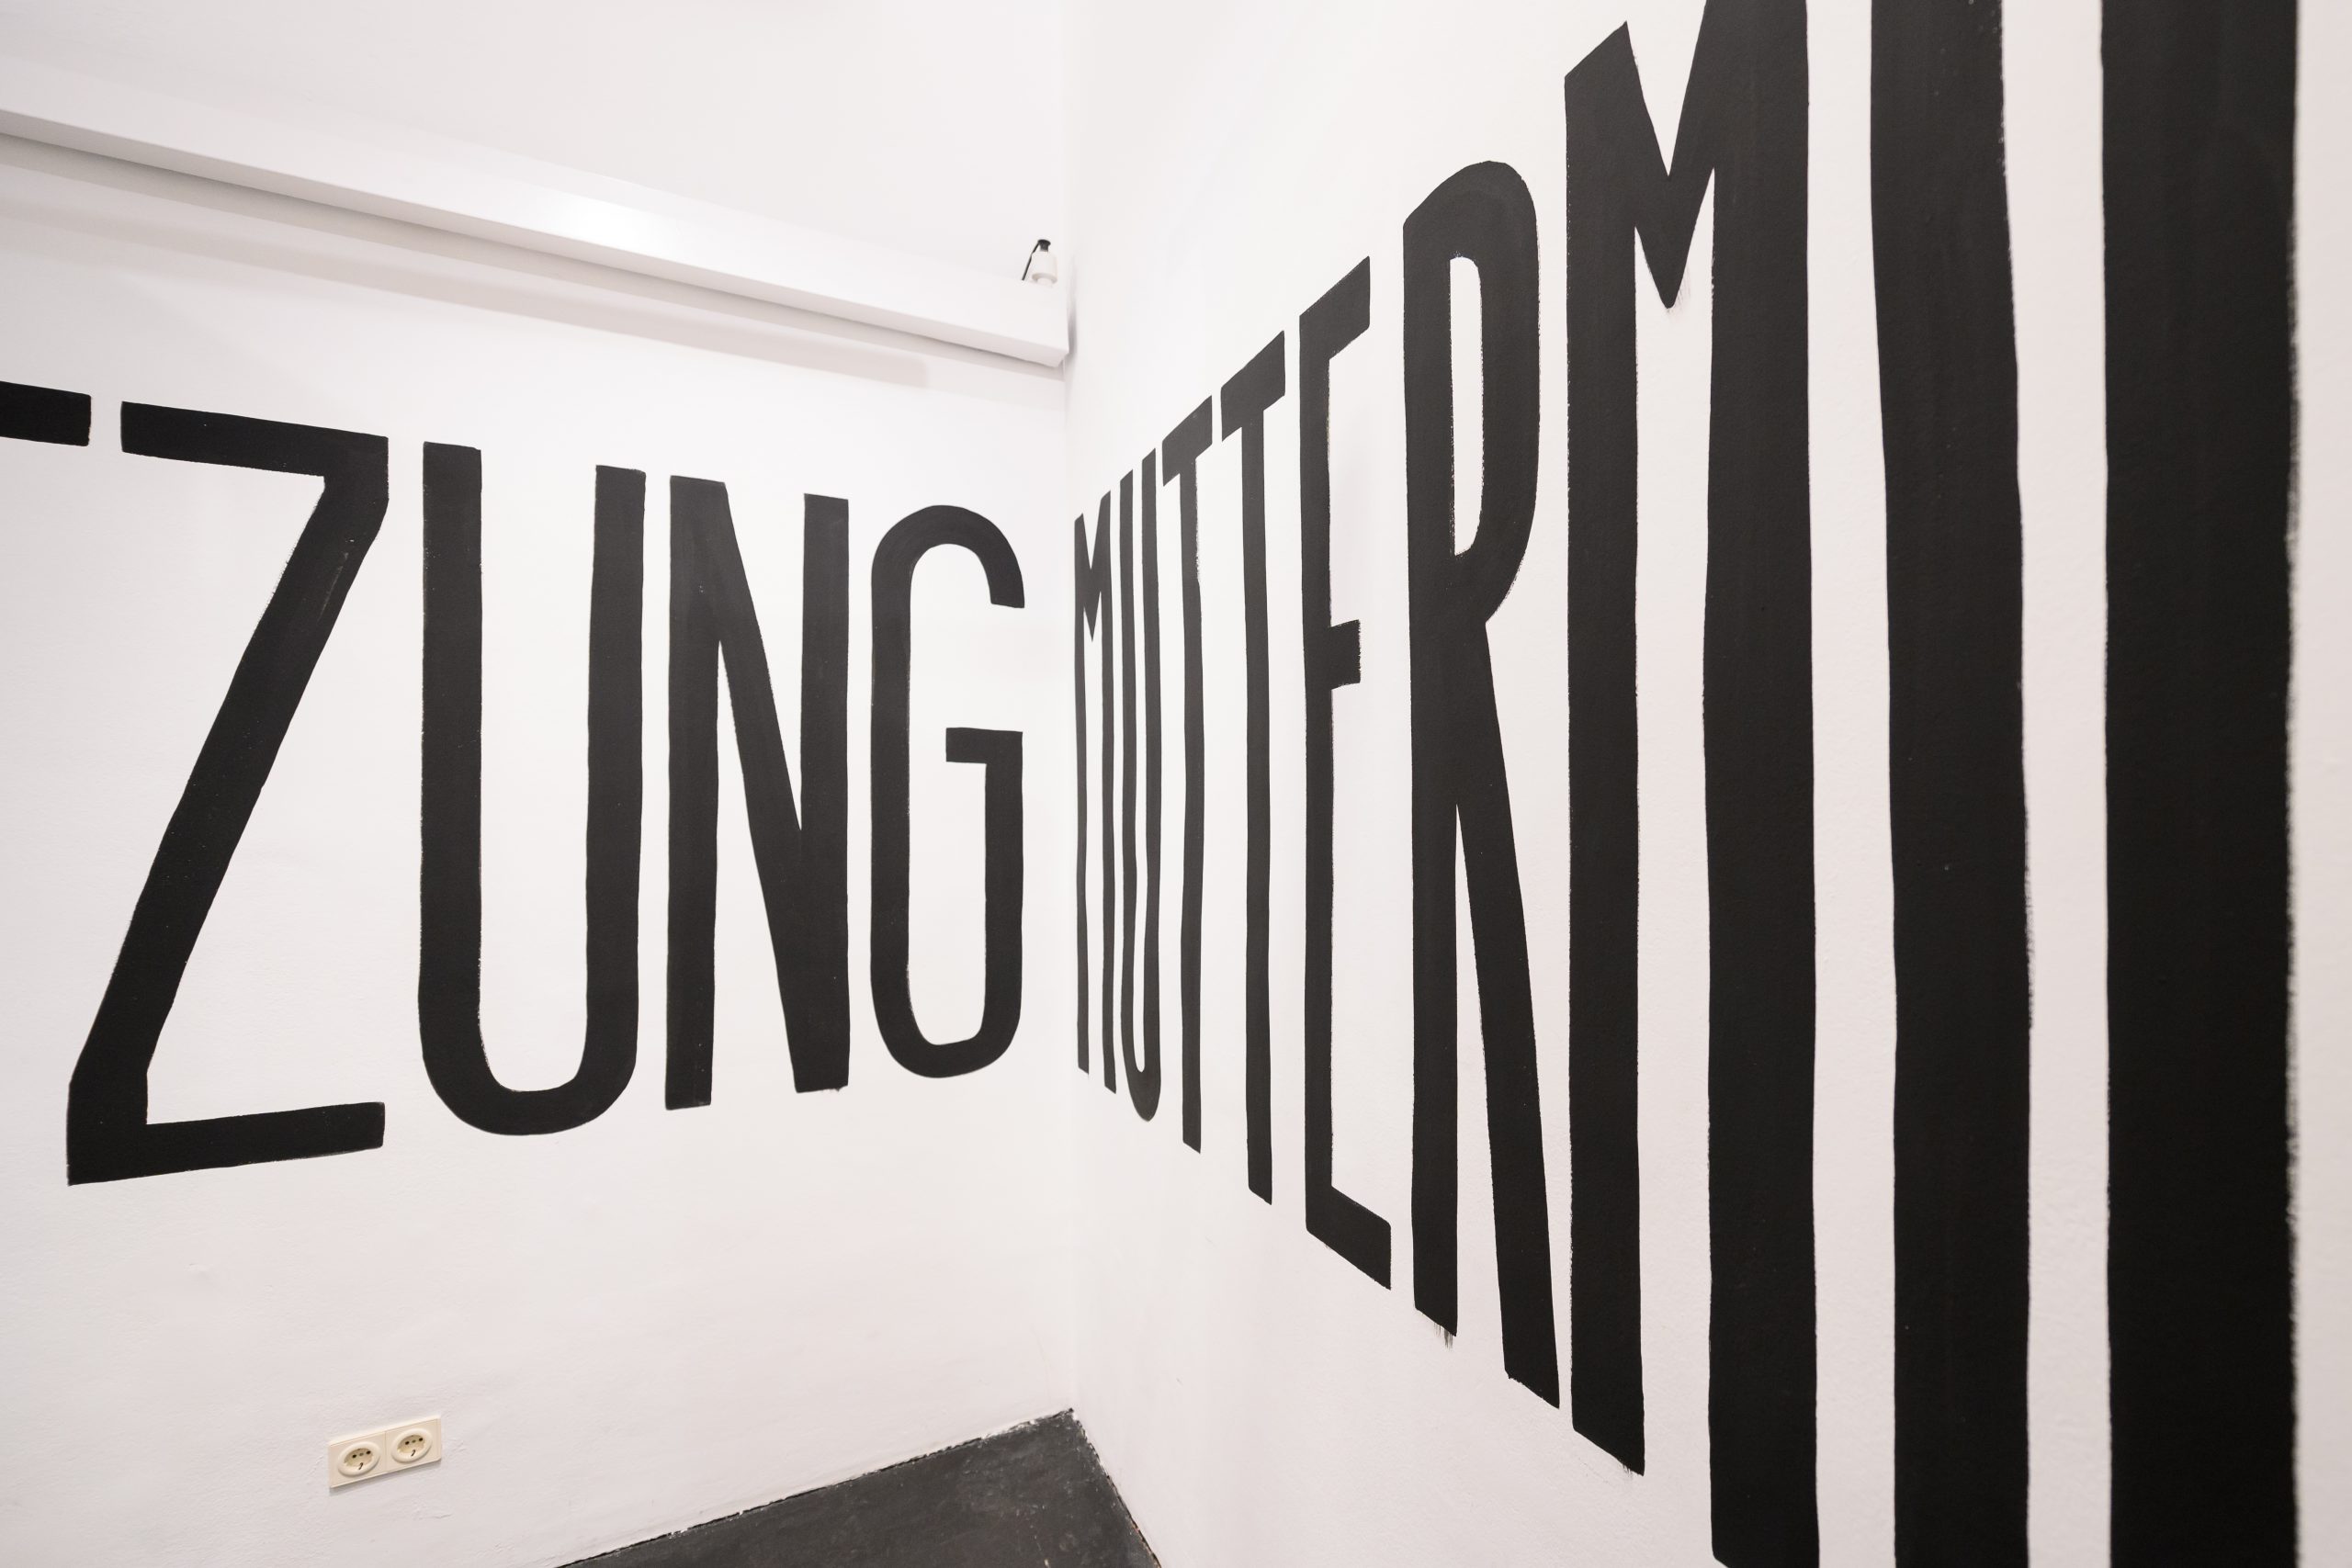 large black letters painted on a white wall